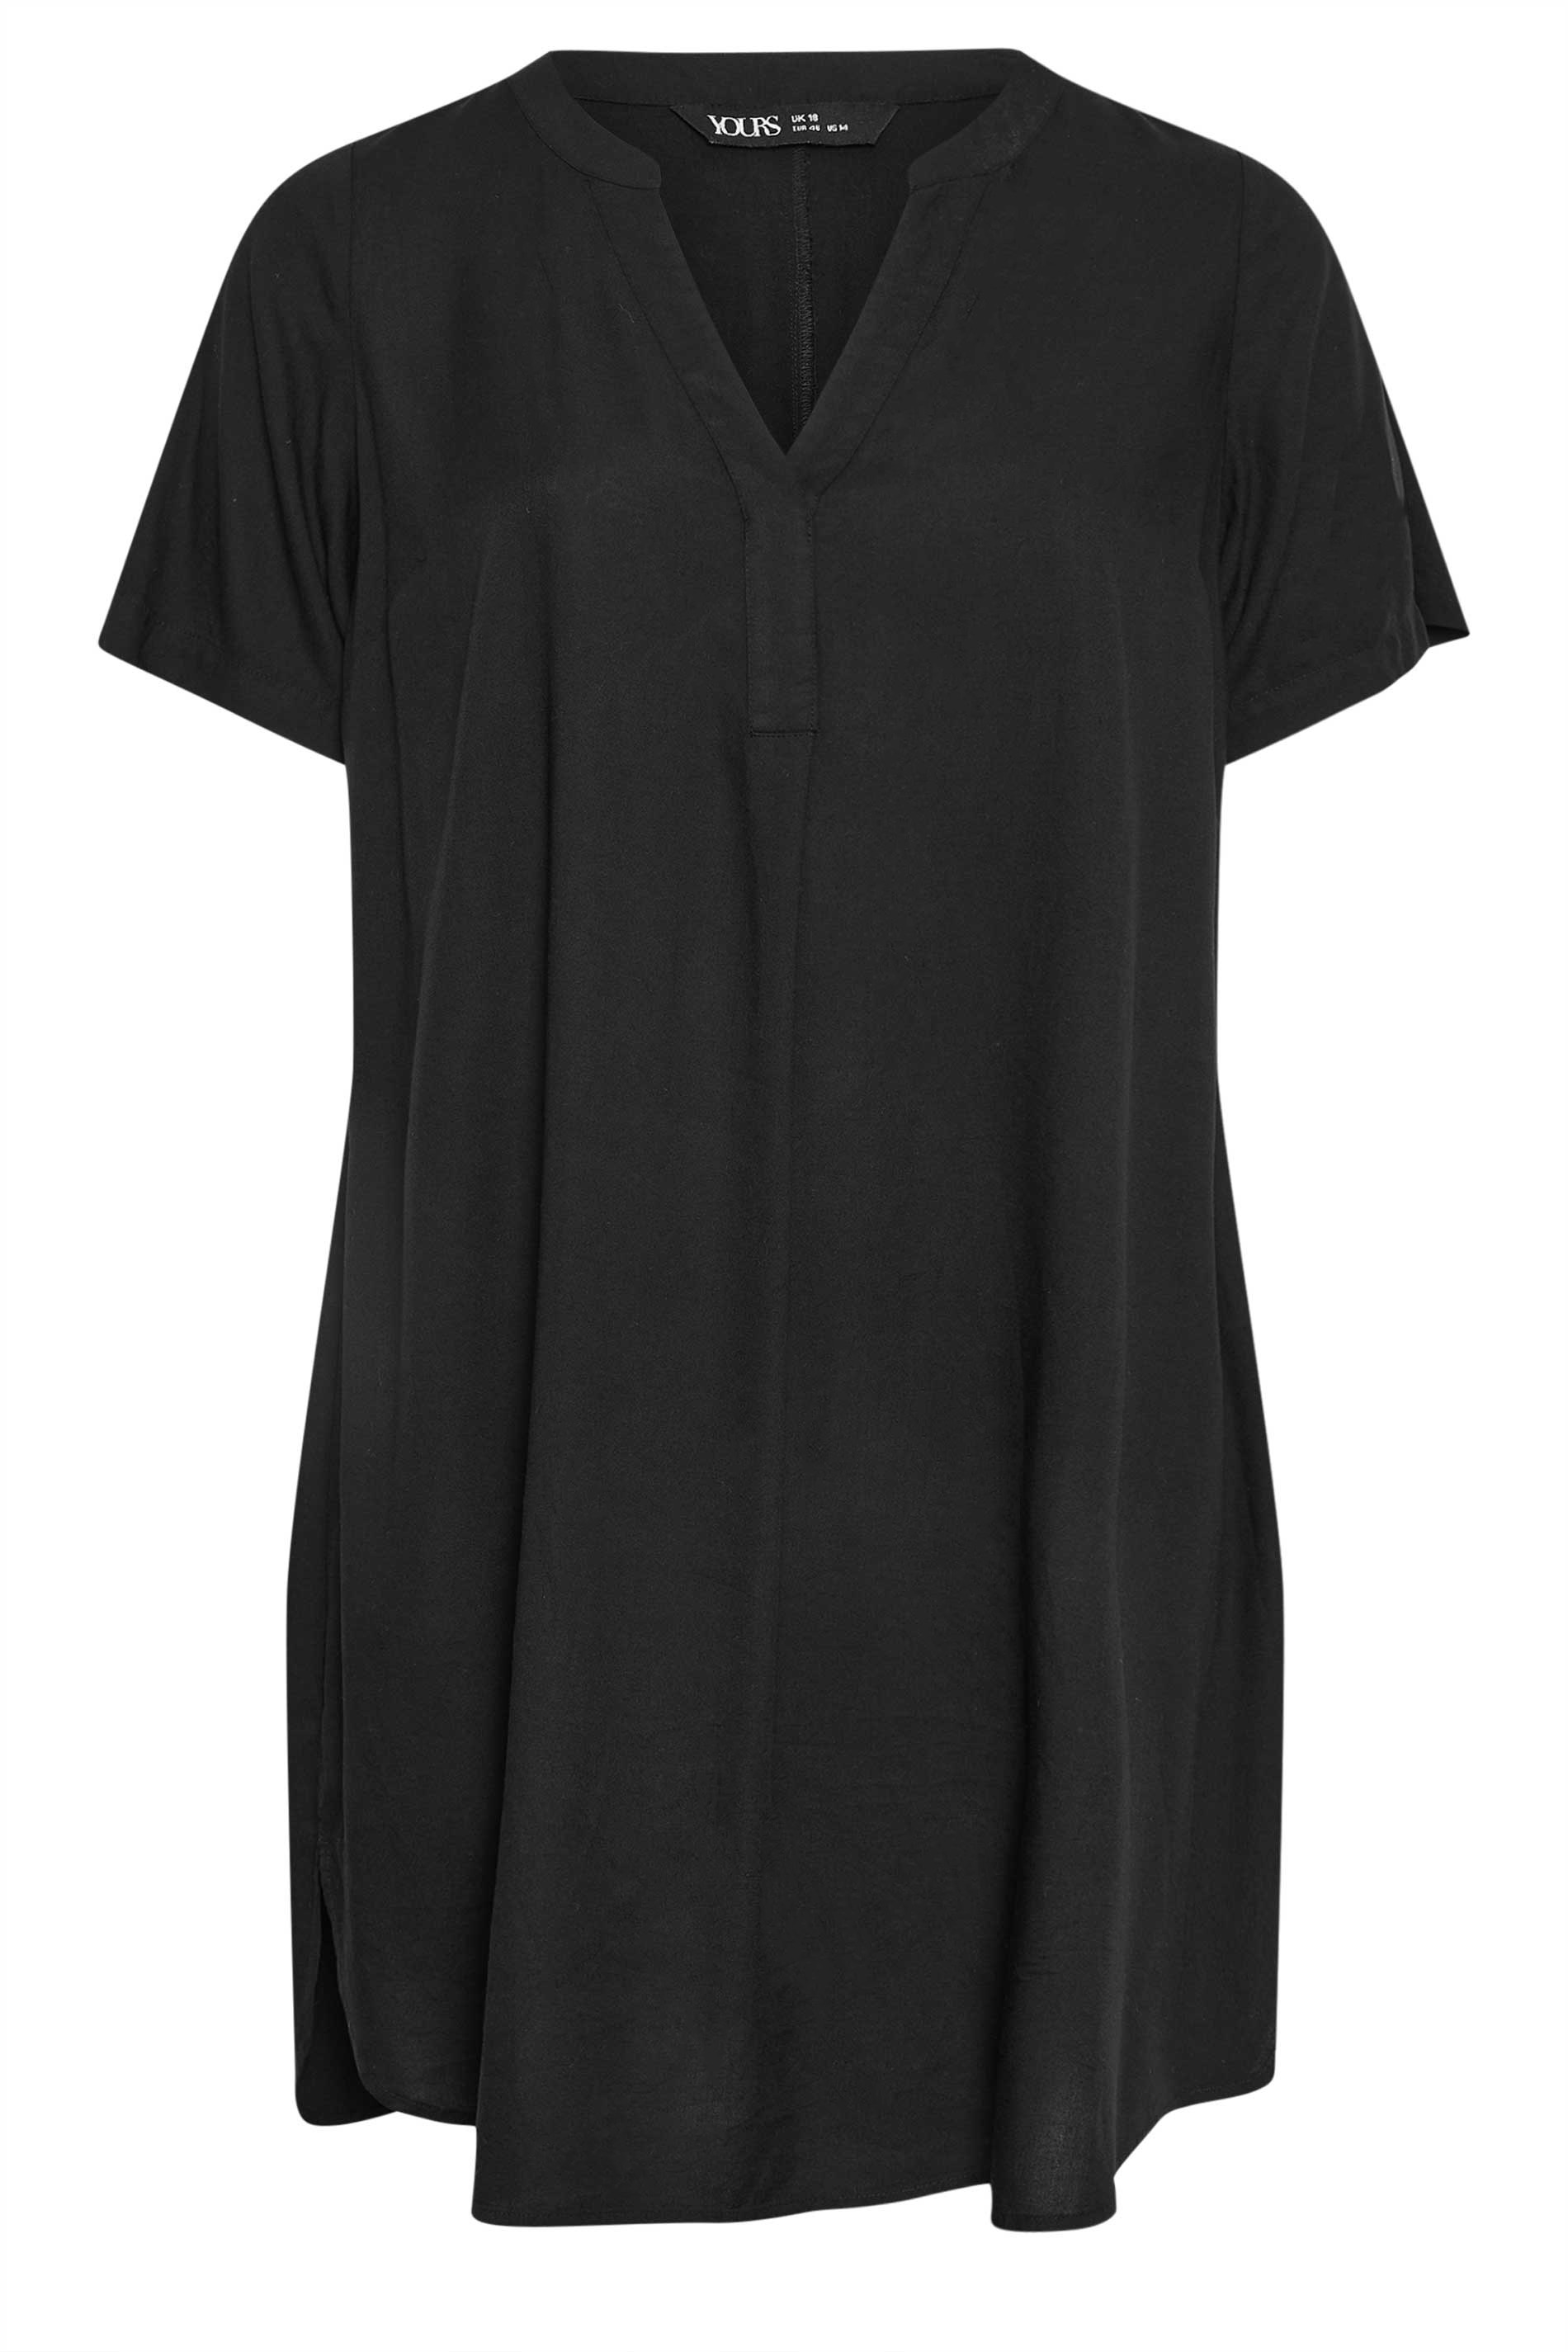 Yours Plus Size Black Tunic Dress | Yours Clothing 3